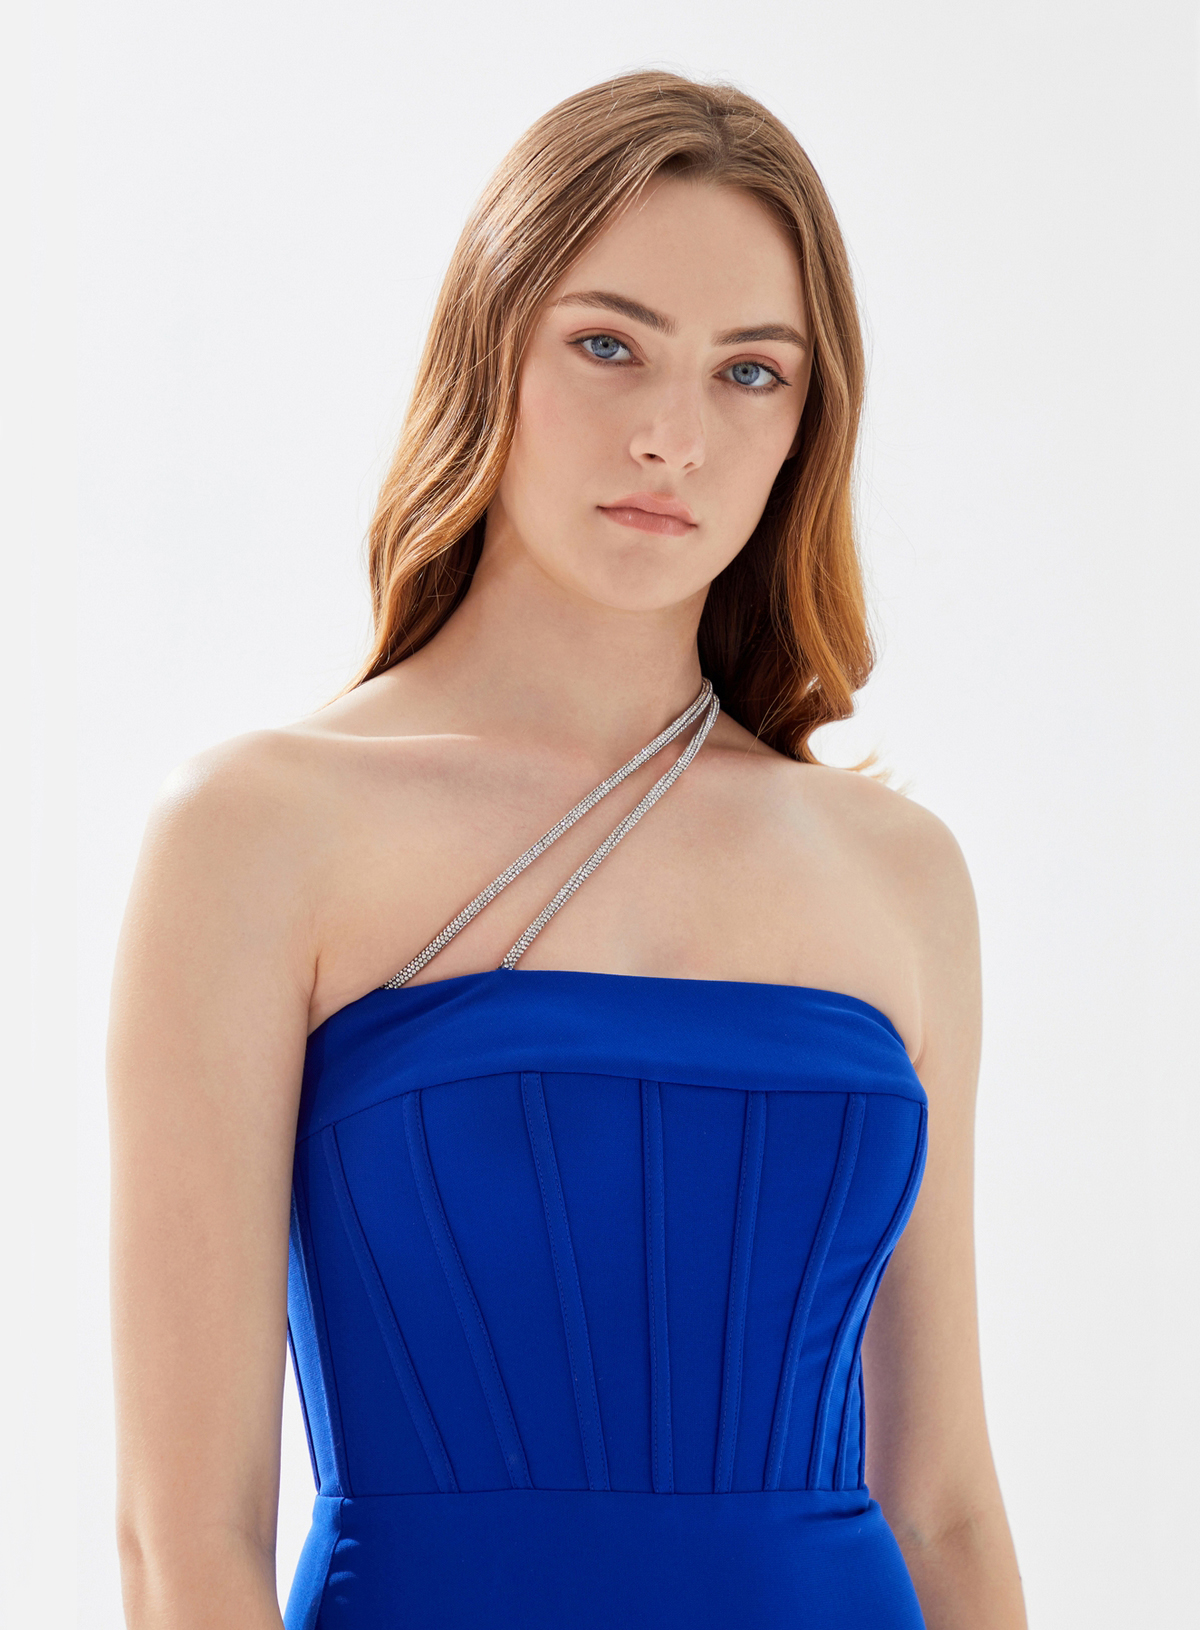 Picture of Gloin Royal Blue Dress